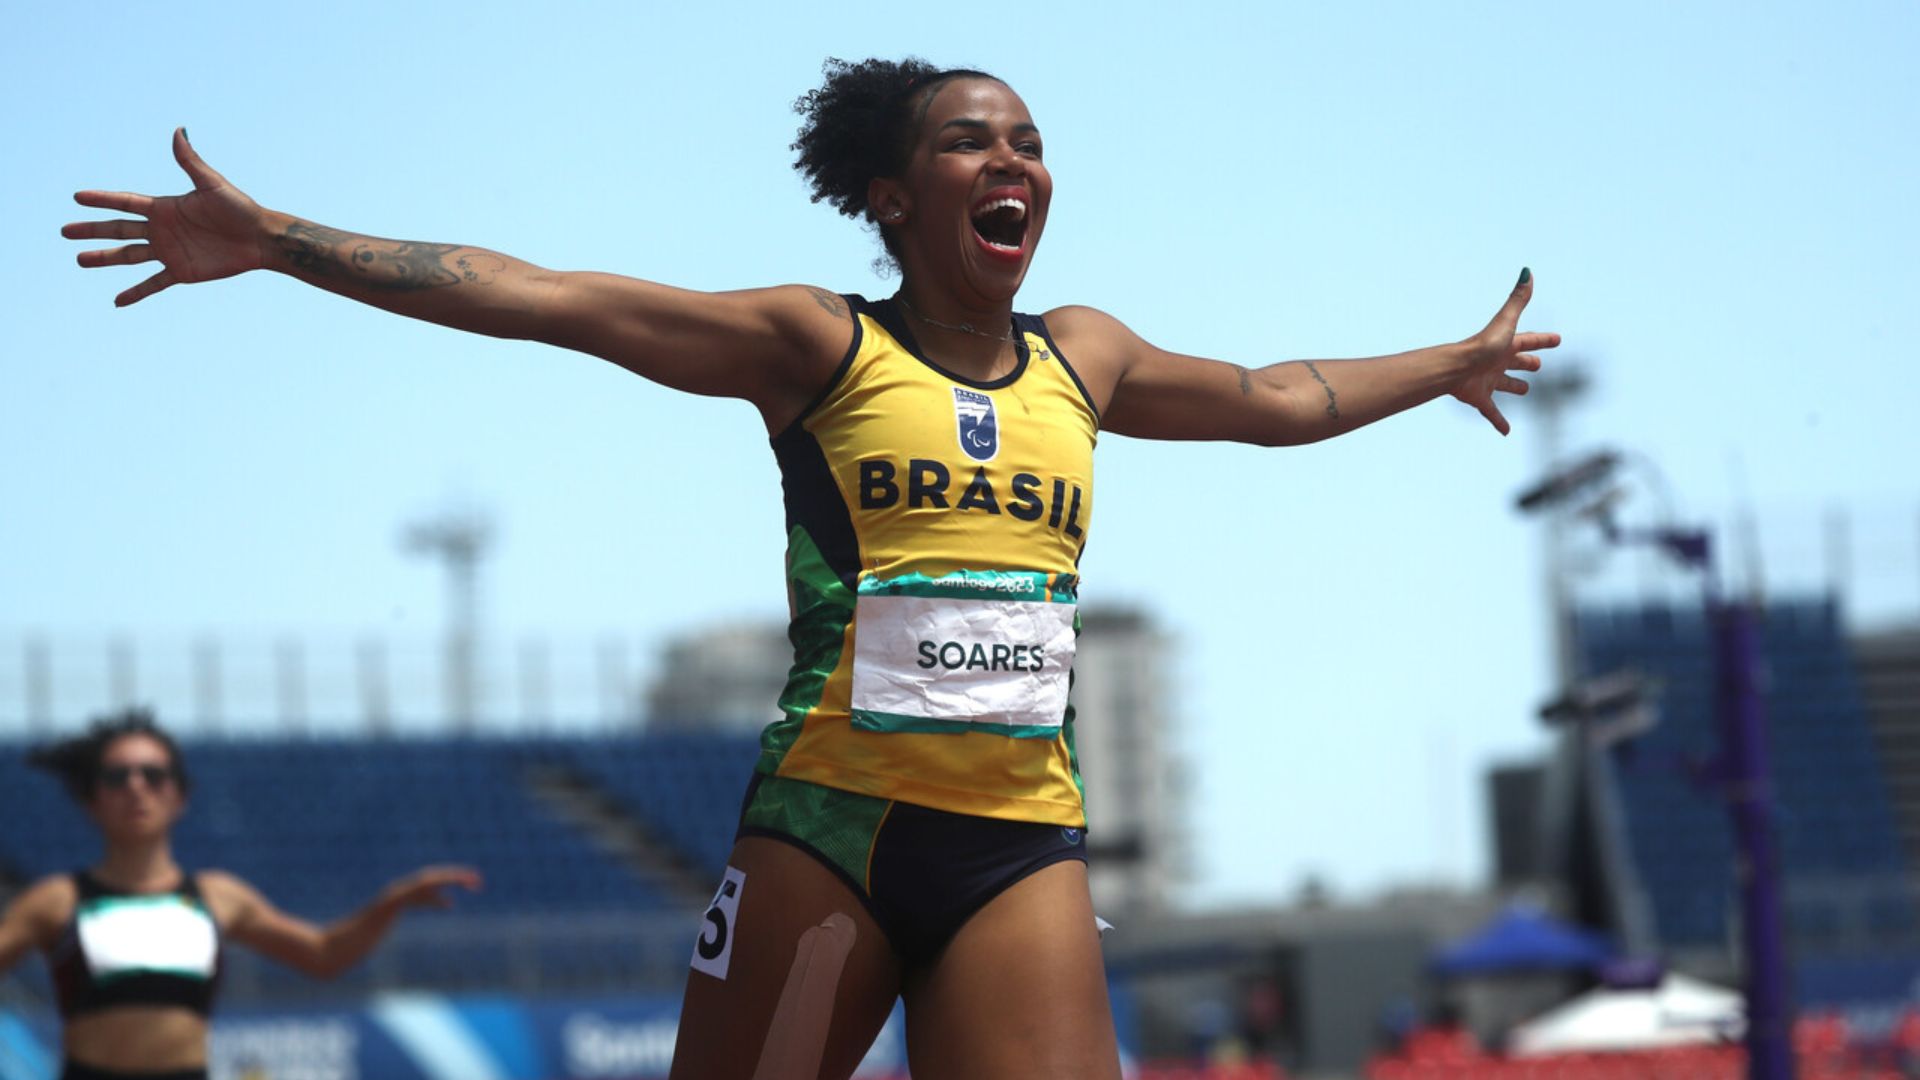 The Gold Medal With a Special Dedication by Rayane Soares